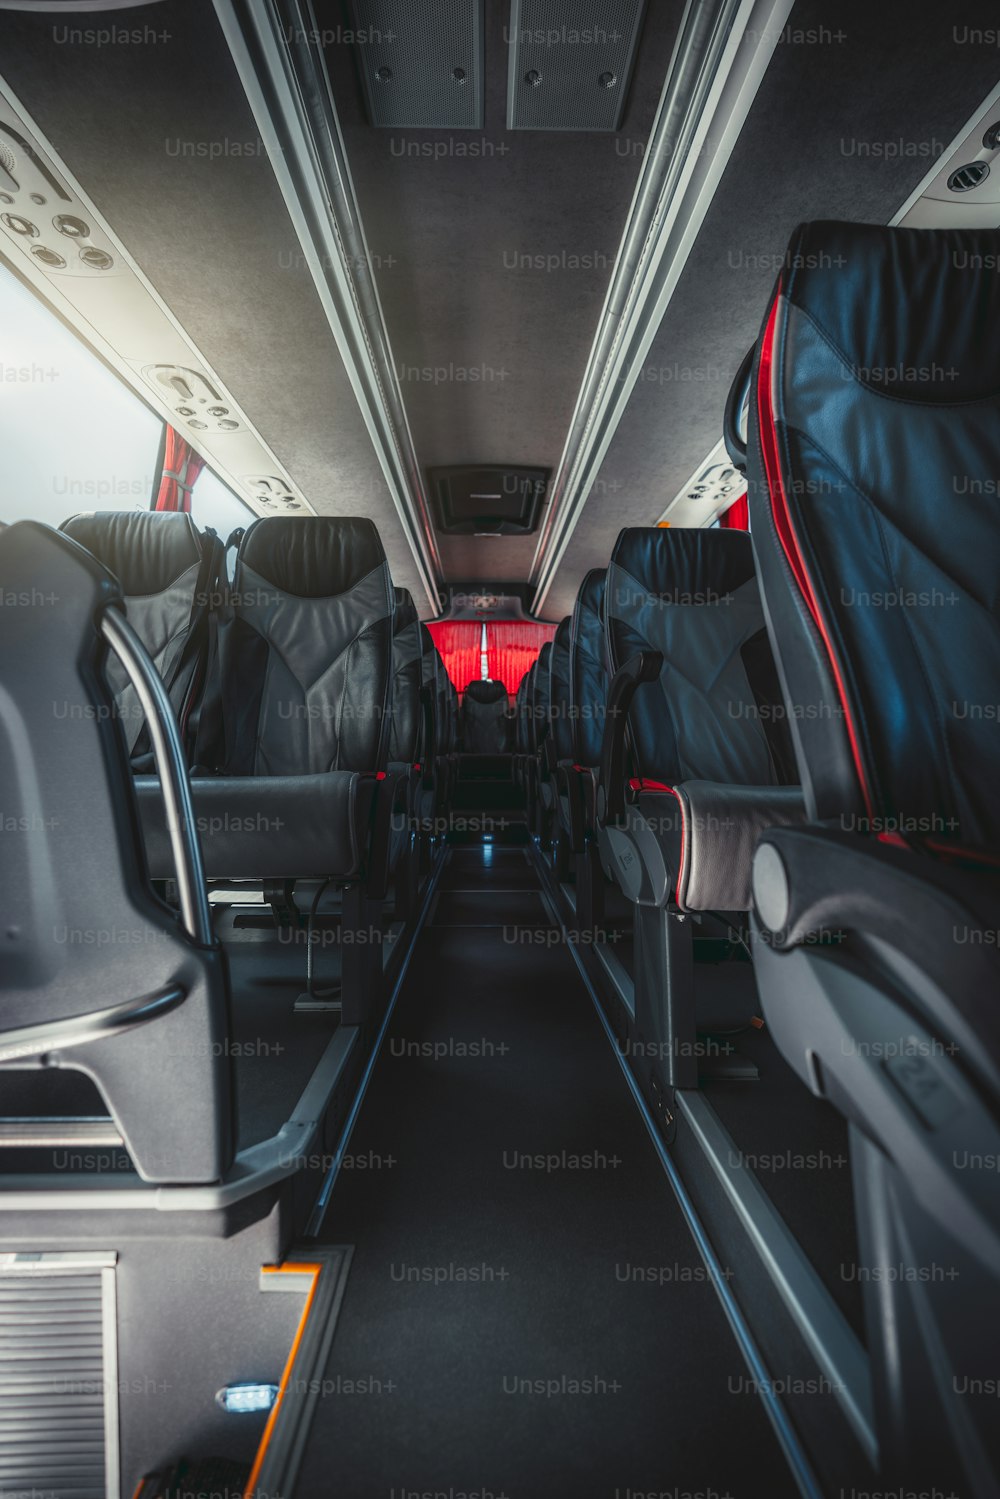 A vertical wide-angle view of an empty interior of a regular intercity bus with rows of leather numbered seats with red borders, carpeted seat aisle in the center